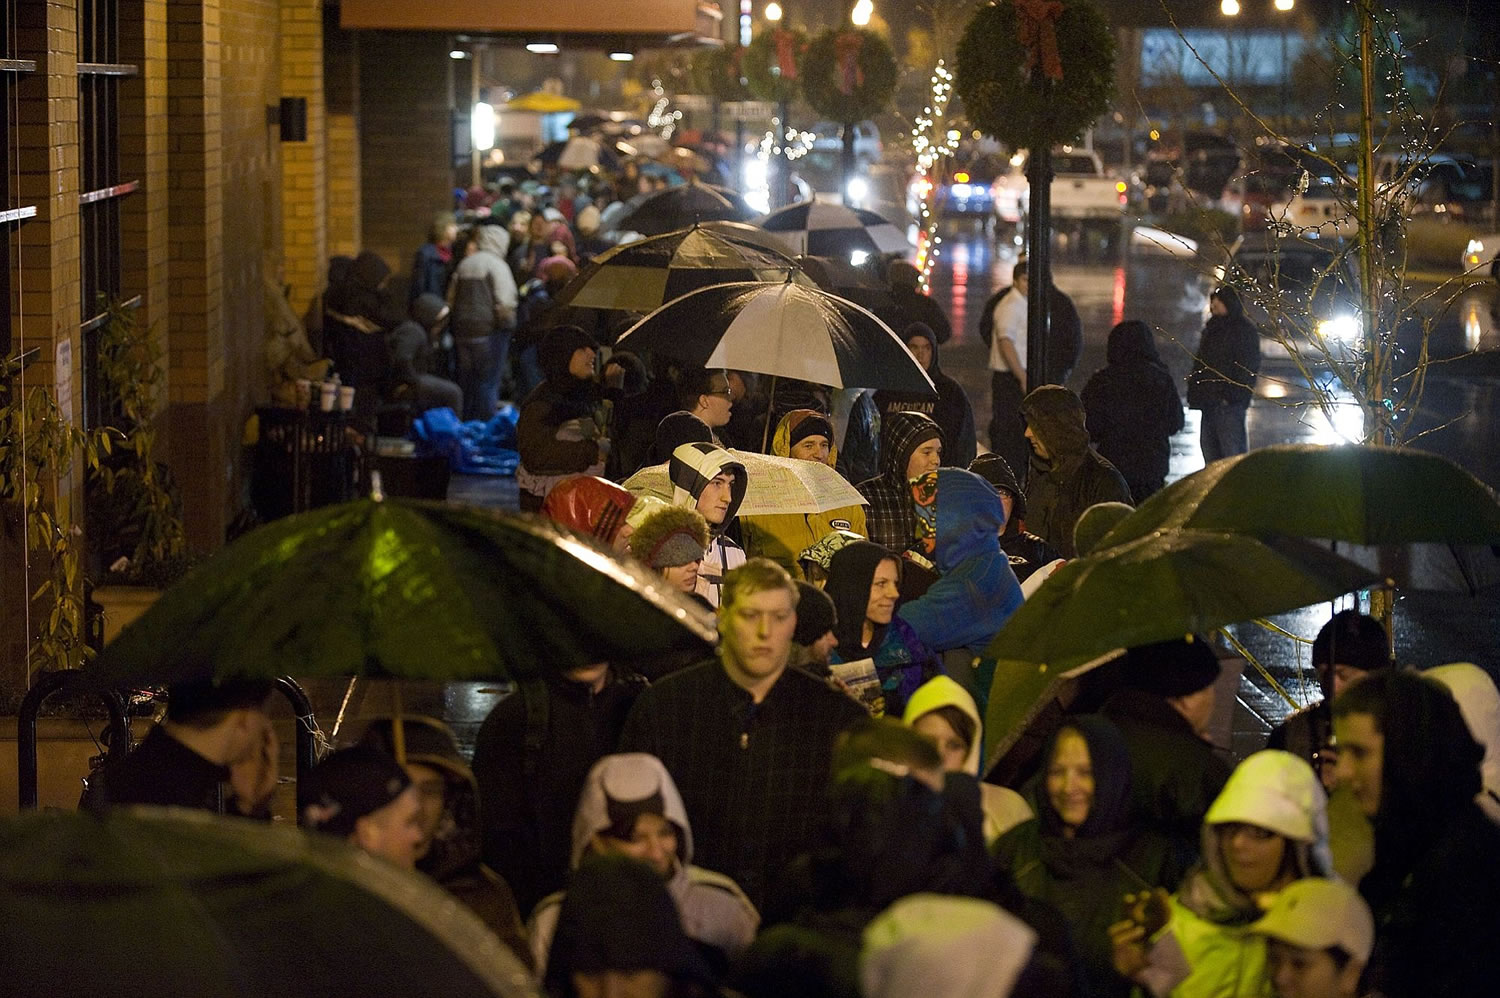 Steven Lane/The Columbian
Rain didn't deter bargain-hunters from waiting all night at Vancouver's Best Buy store. A stabilizing economy and shorter inventories may prevent extreme discounting as Christmas approaches.